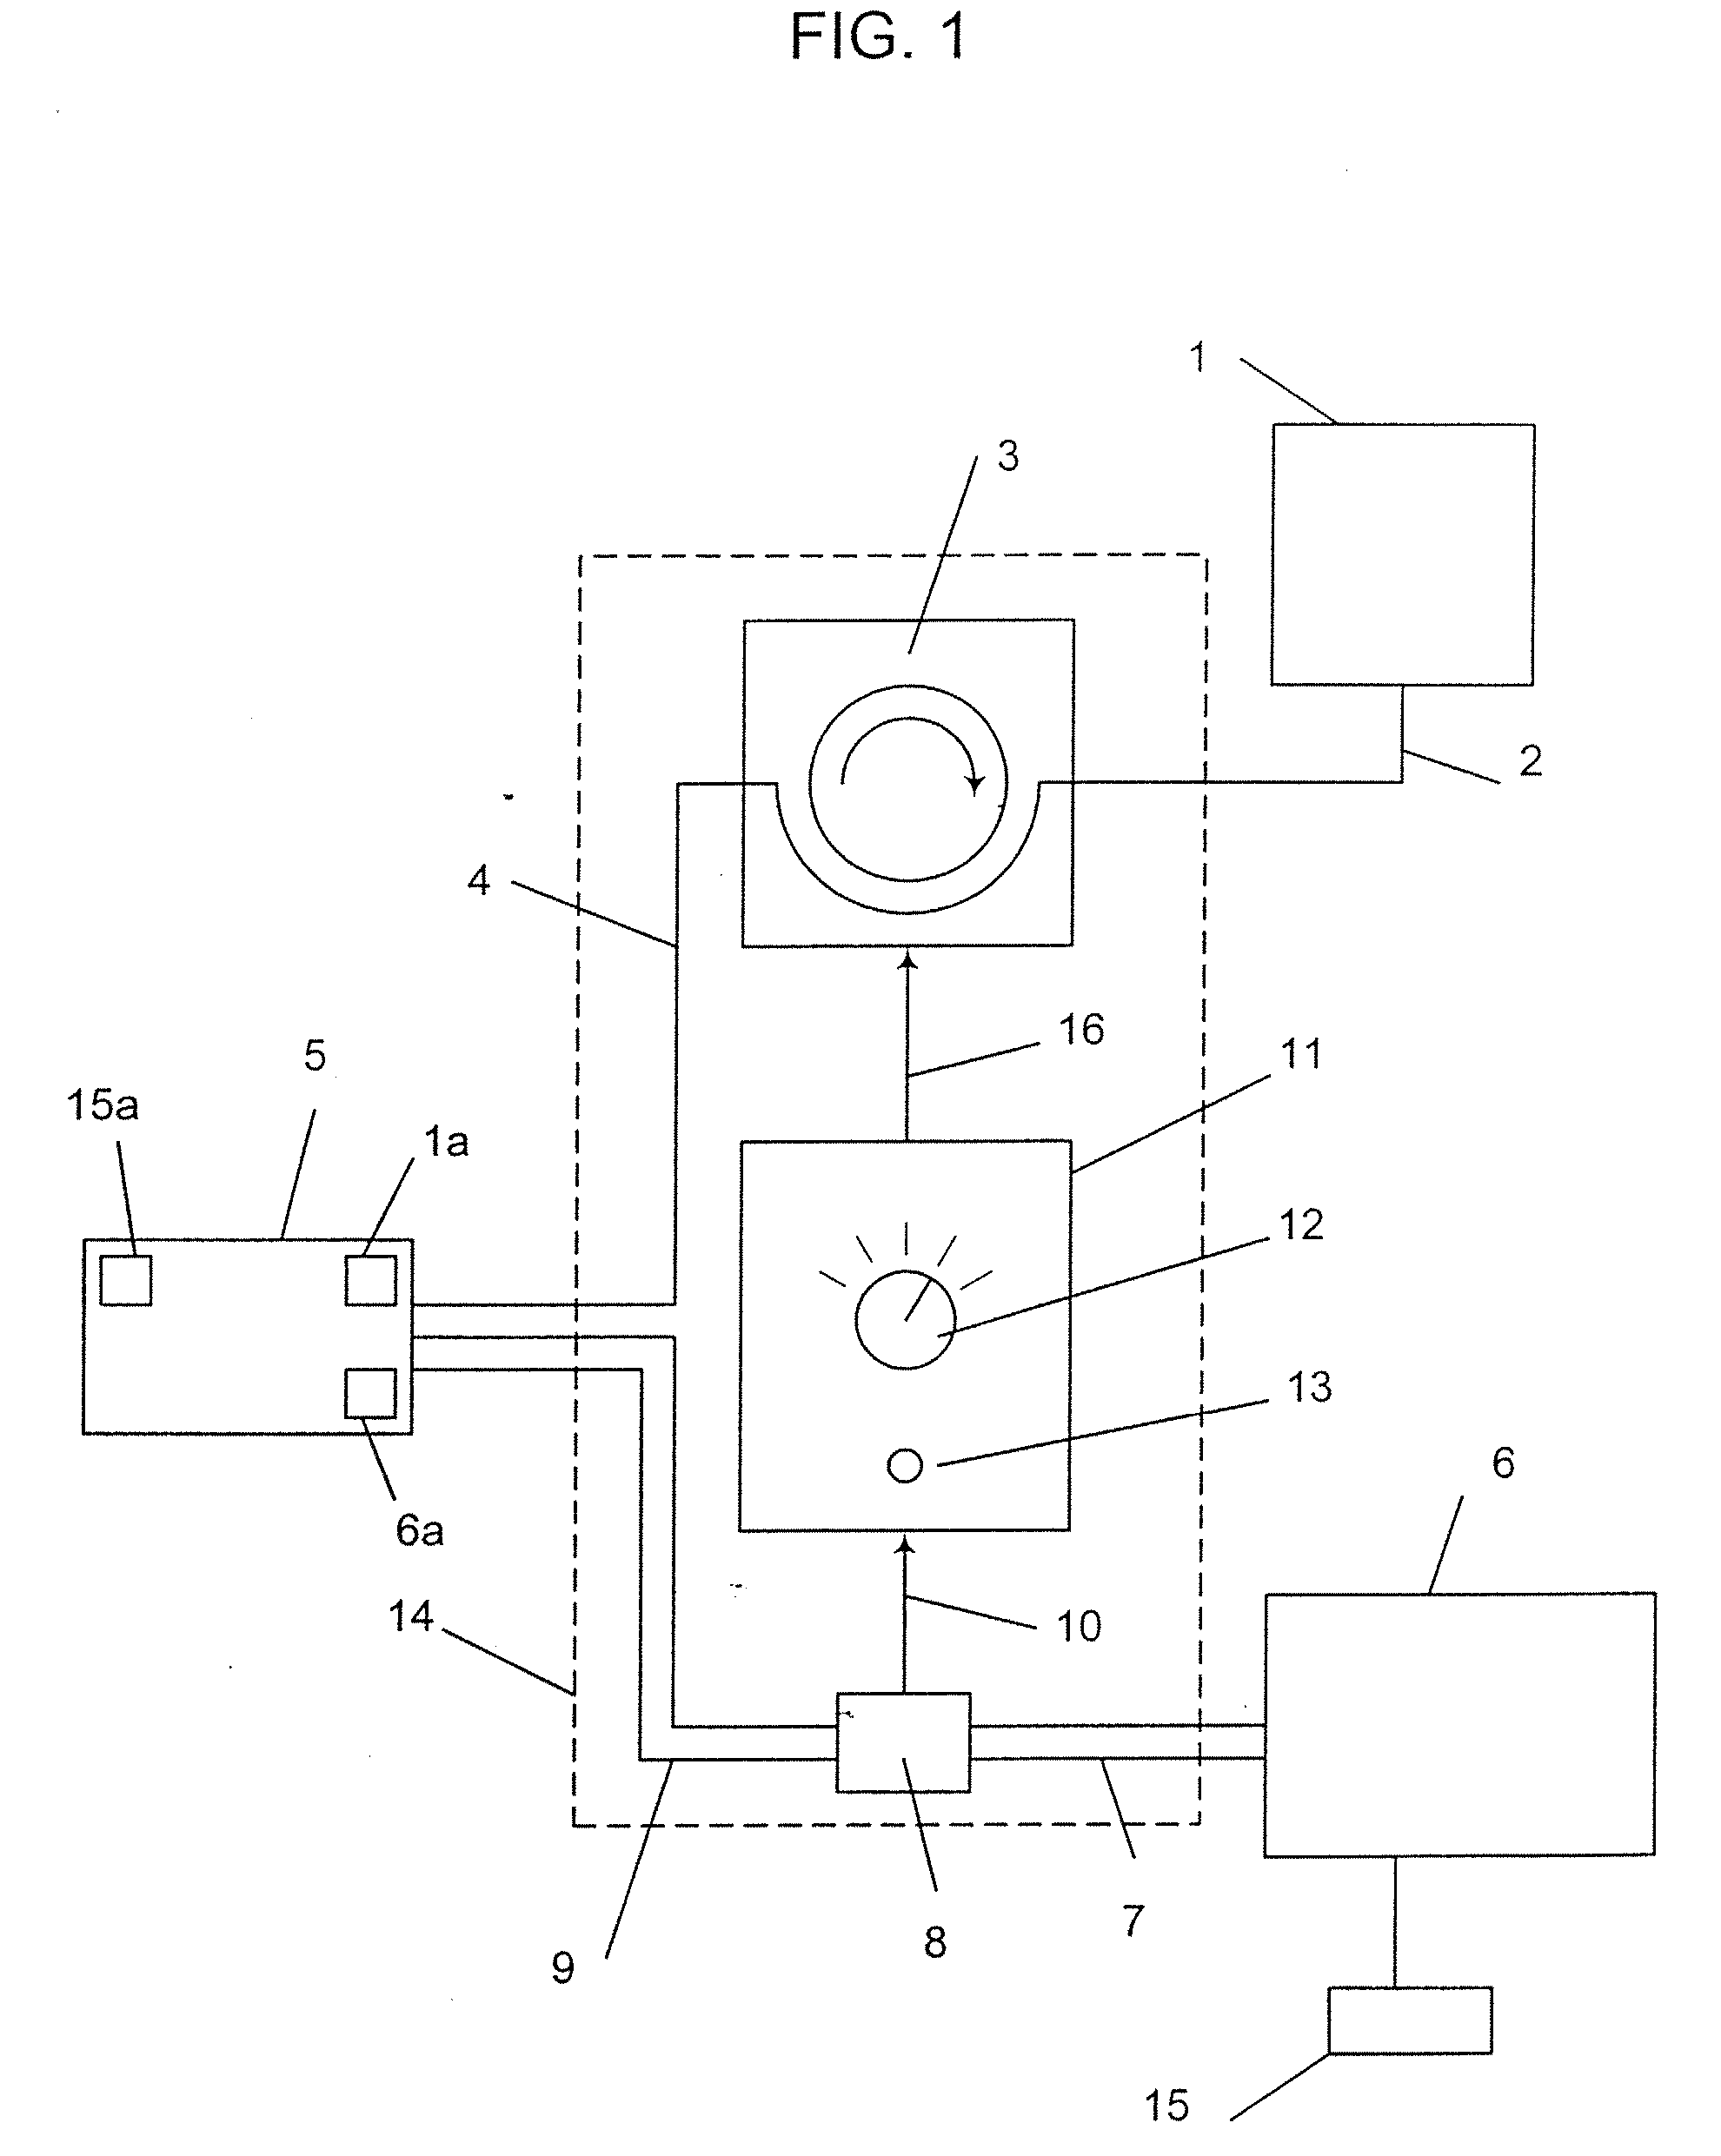 Fluid-Assisted Medical Devices, Fluid Delivery Systems and Controllers for Such Devices, and Methods